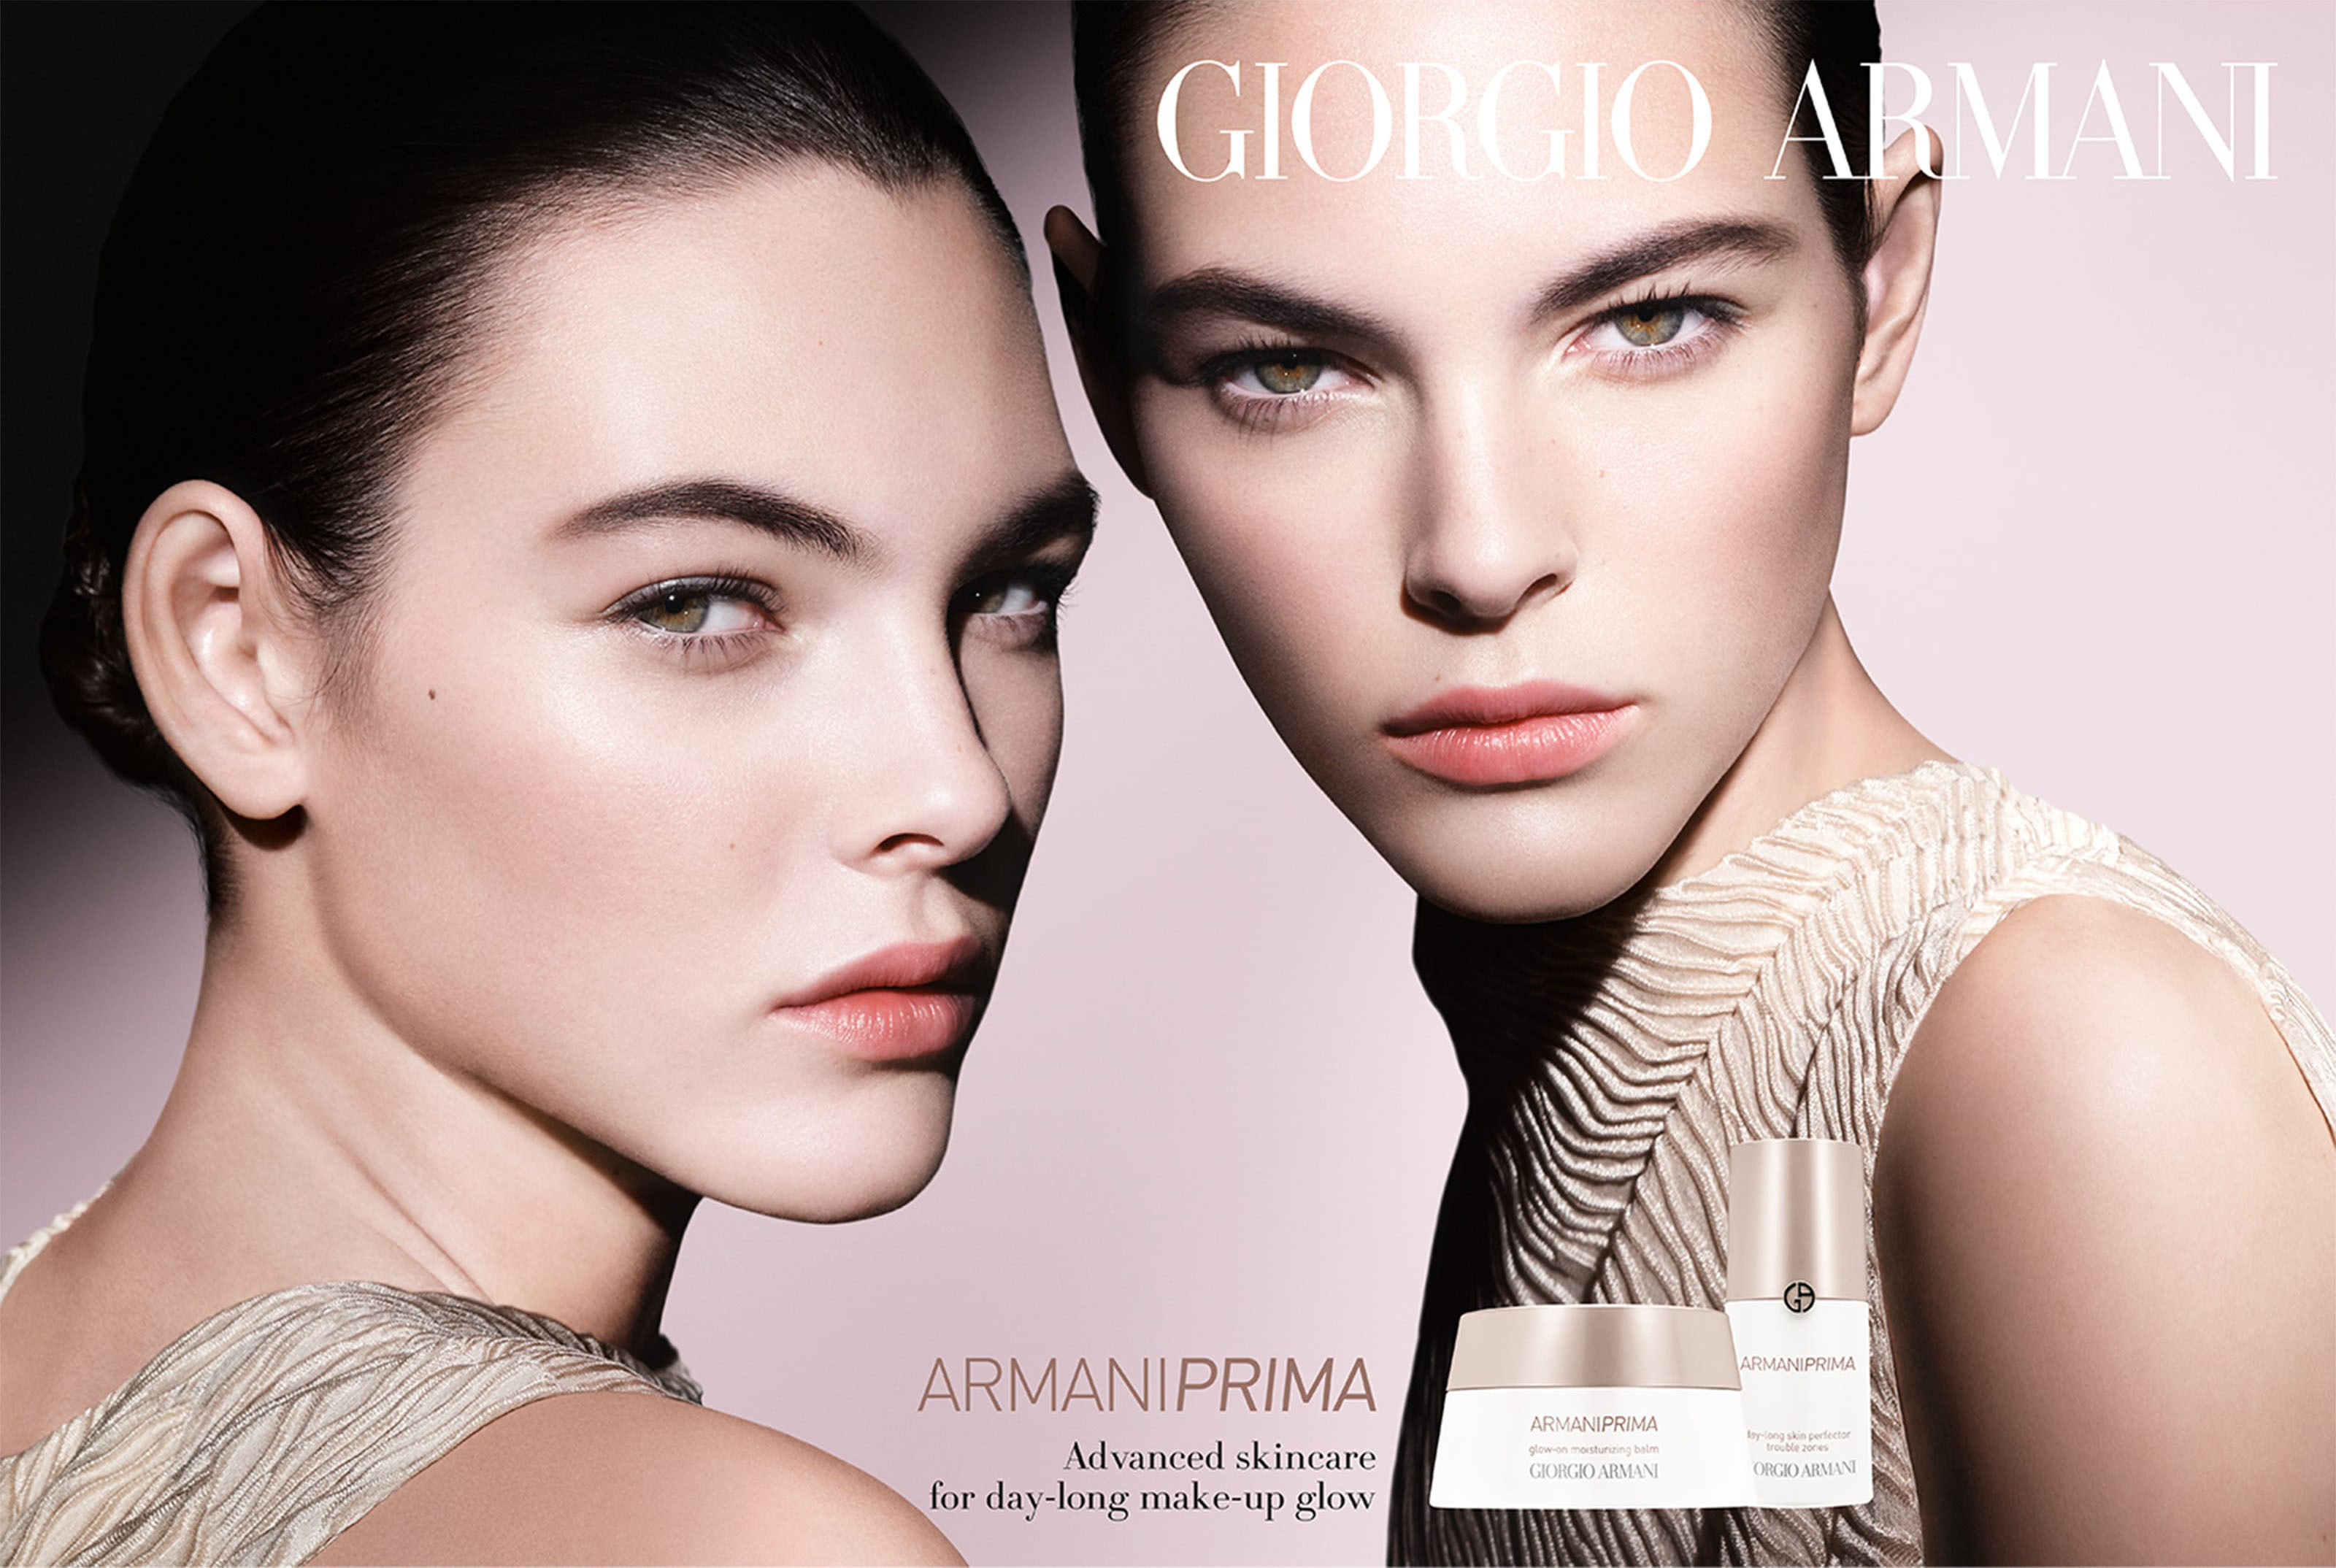 ARMANIPRIMA Advanced skincare for day-long make-up glow